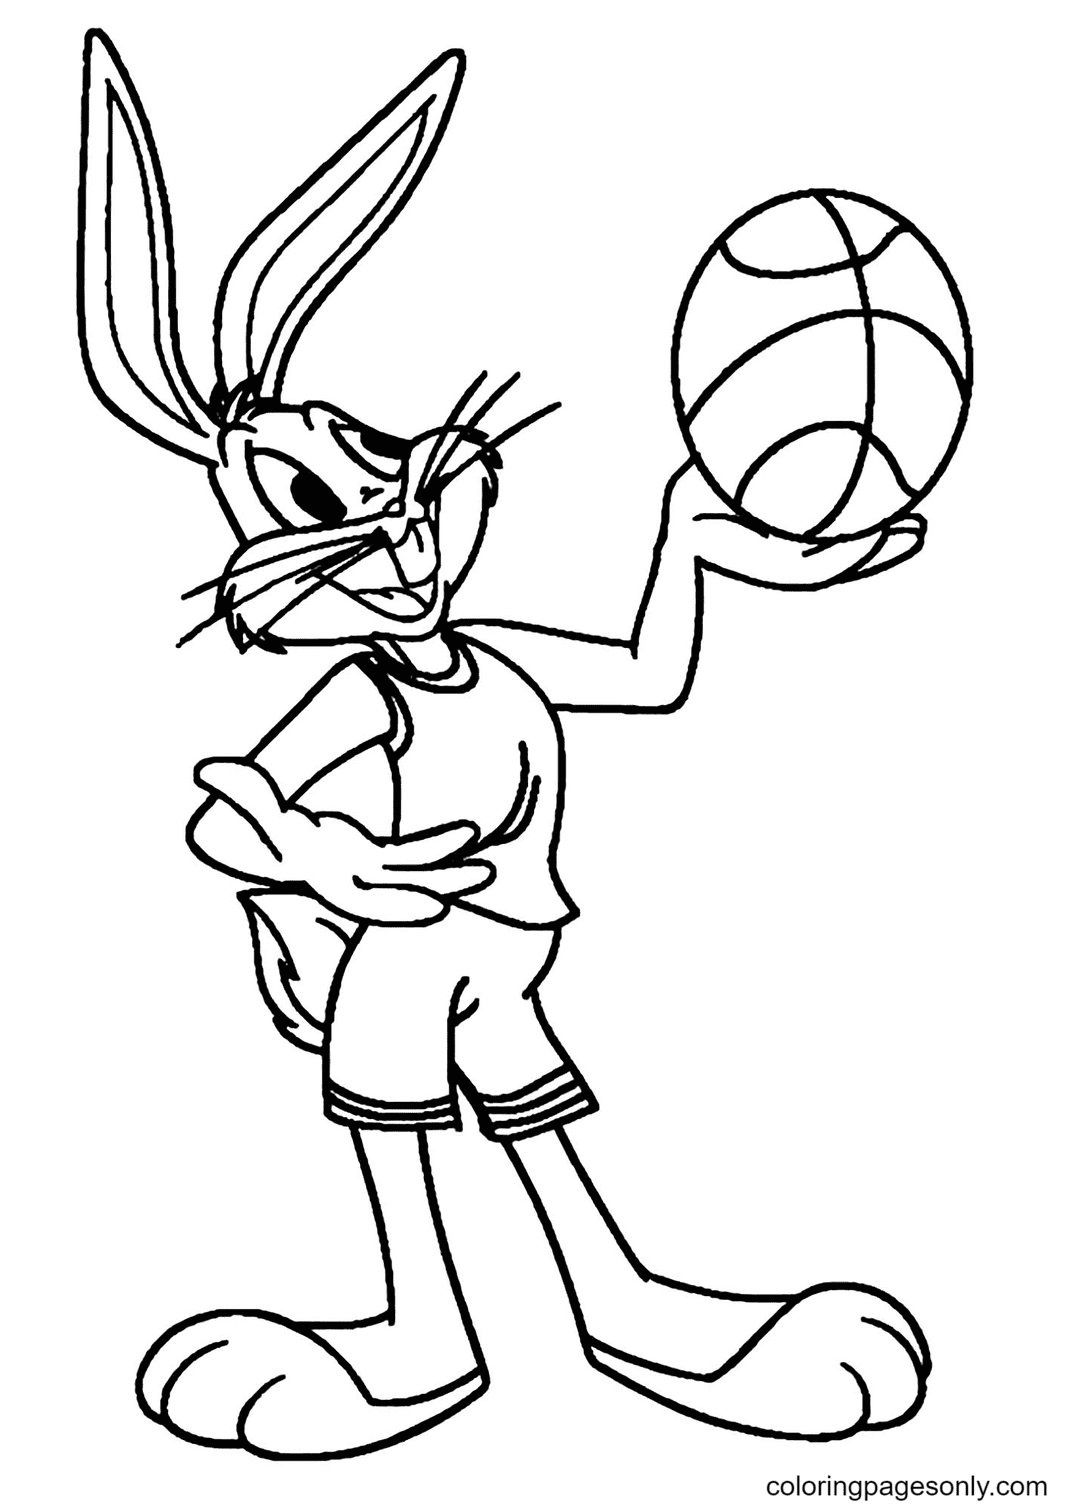 Bugs Bunny Holding a Basketball Coloring Page